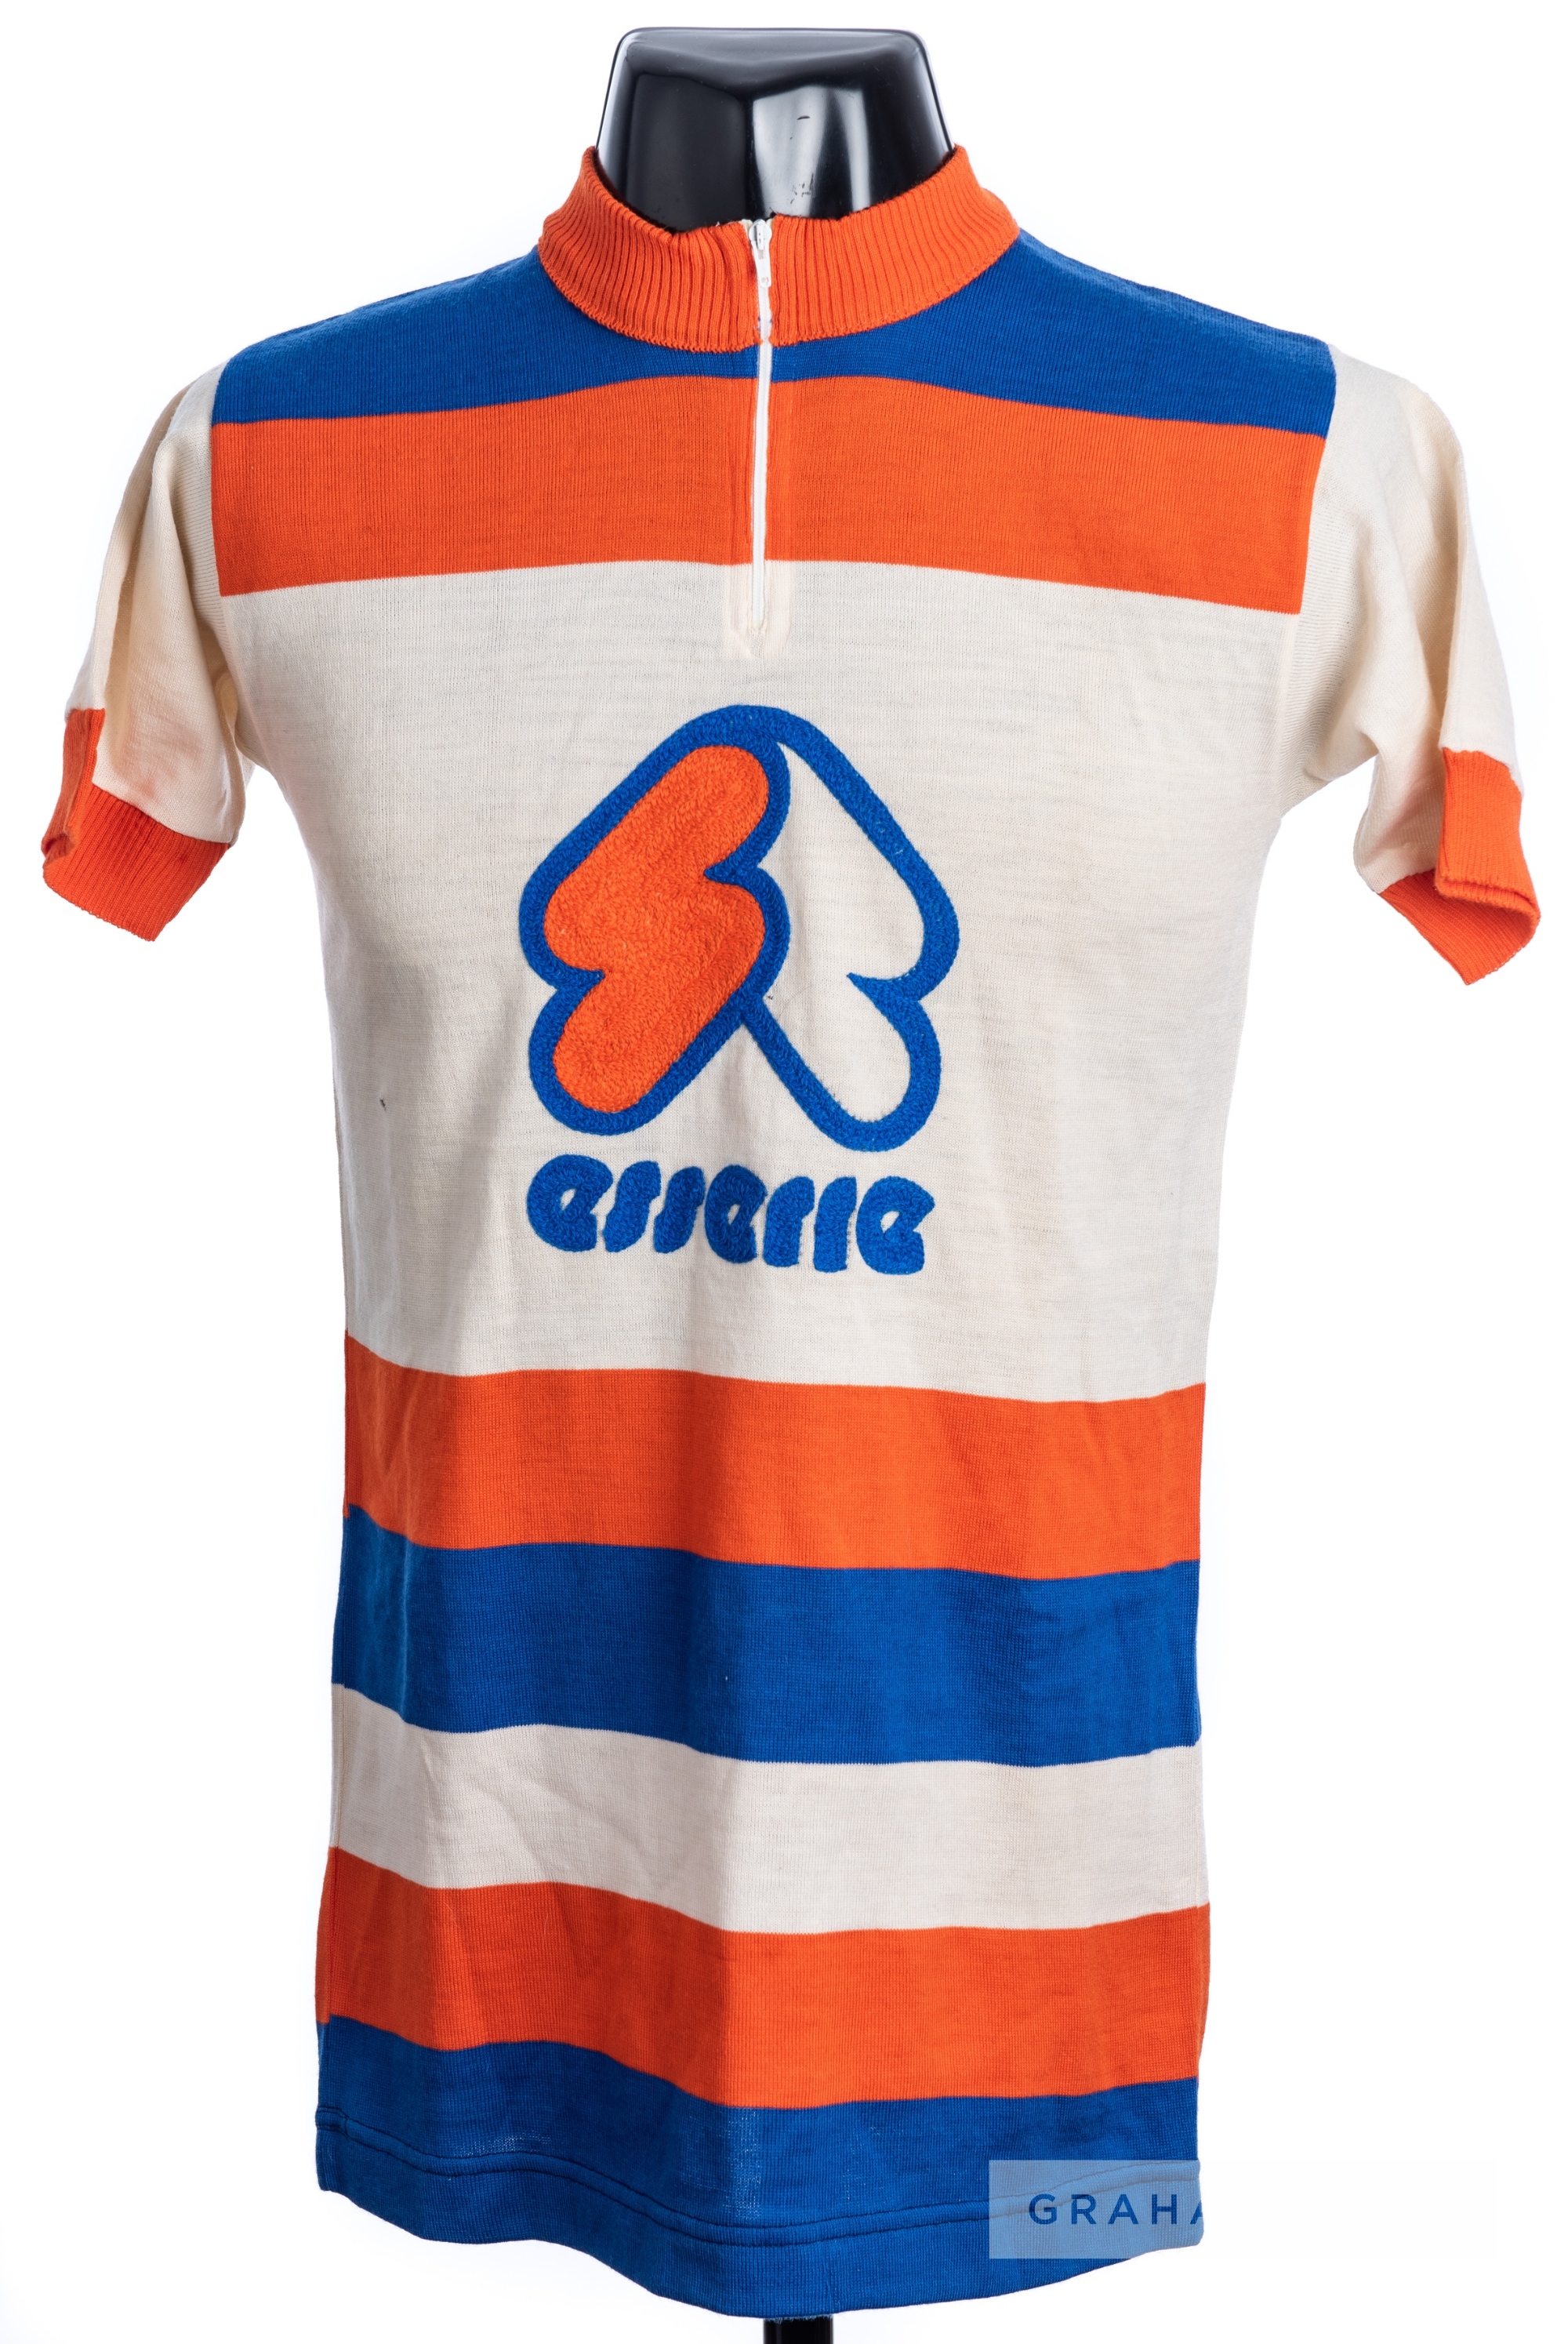 1971 white, orange and blue vintage Esserre Cycling race jersey, scarce, wool and acrylic short- - Image 3 of 4